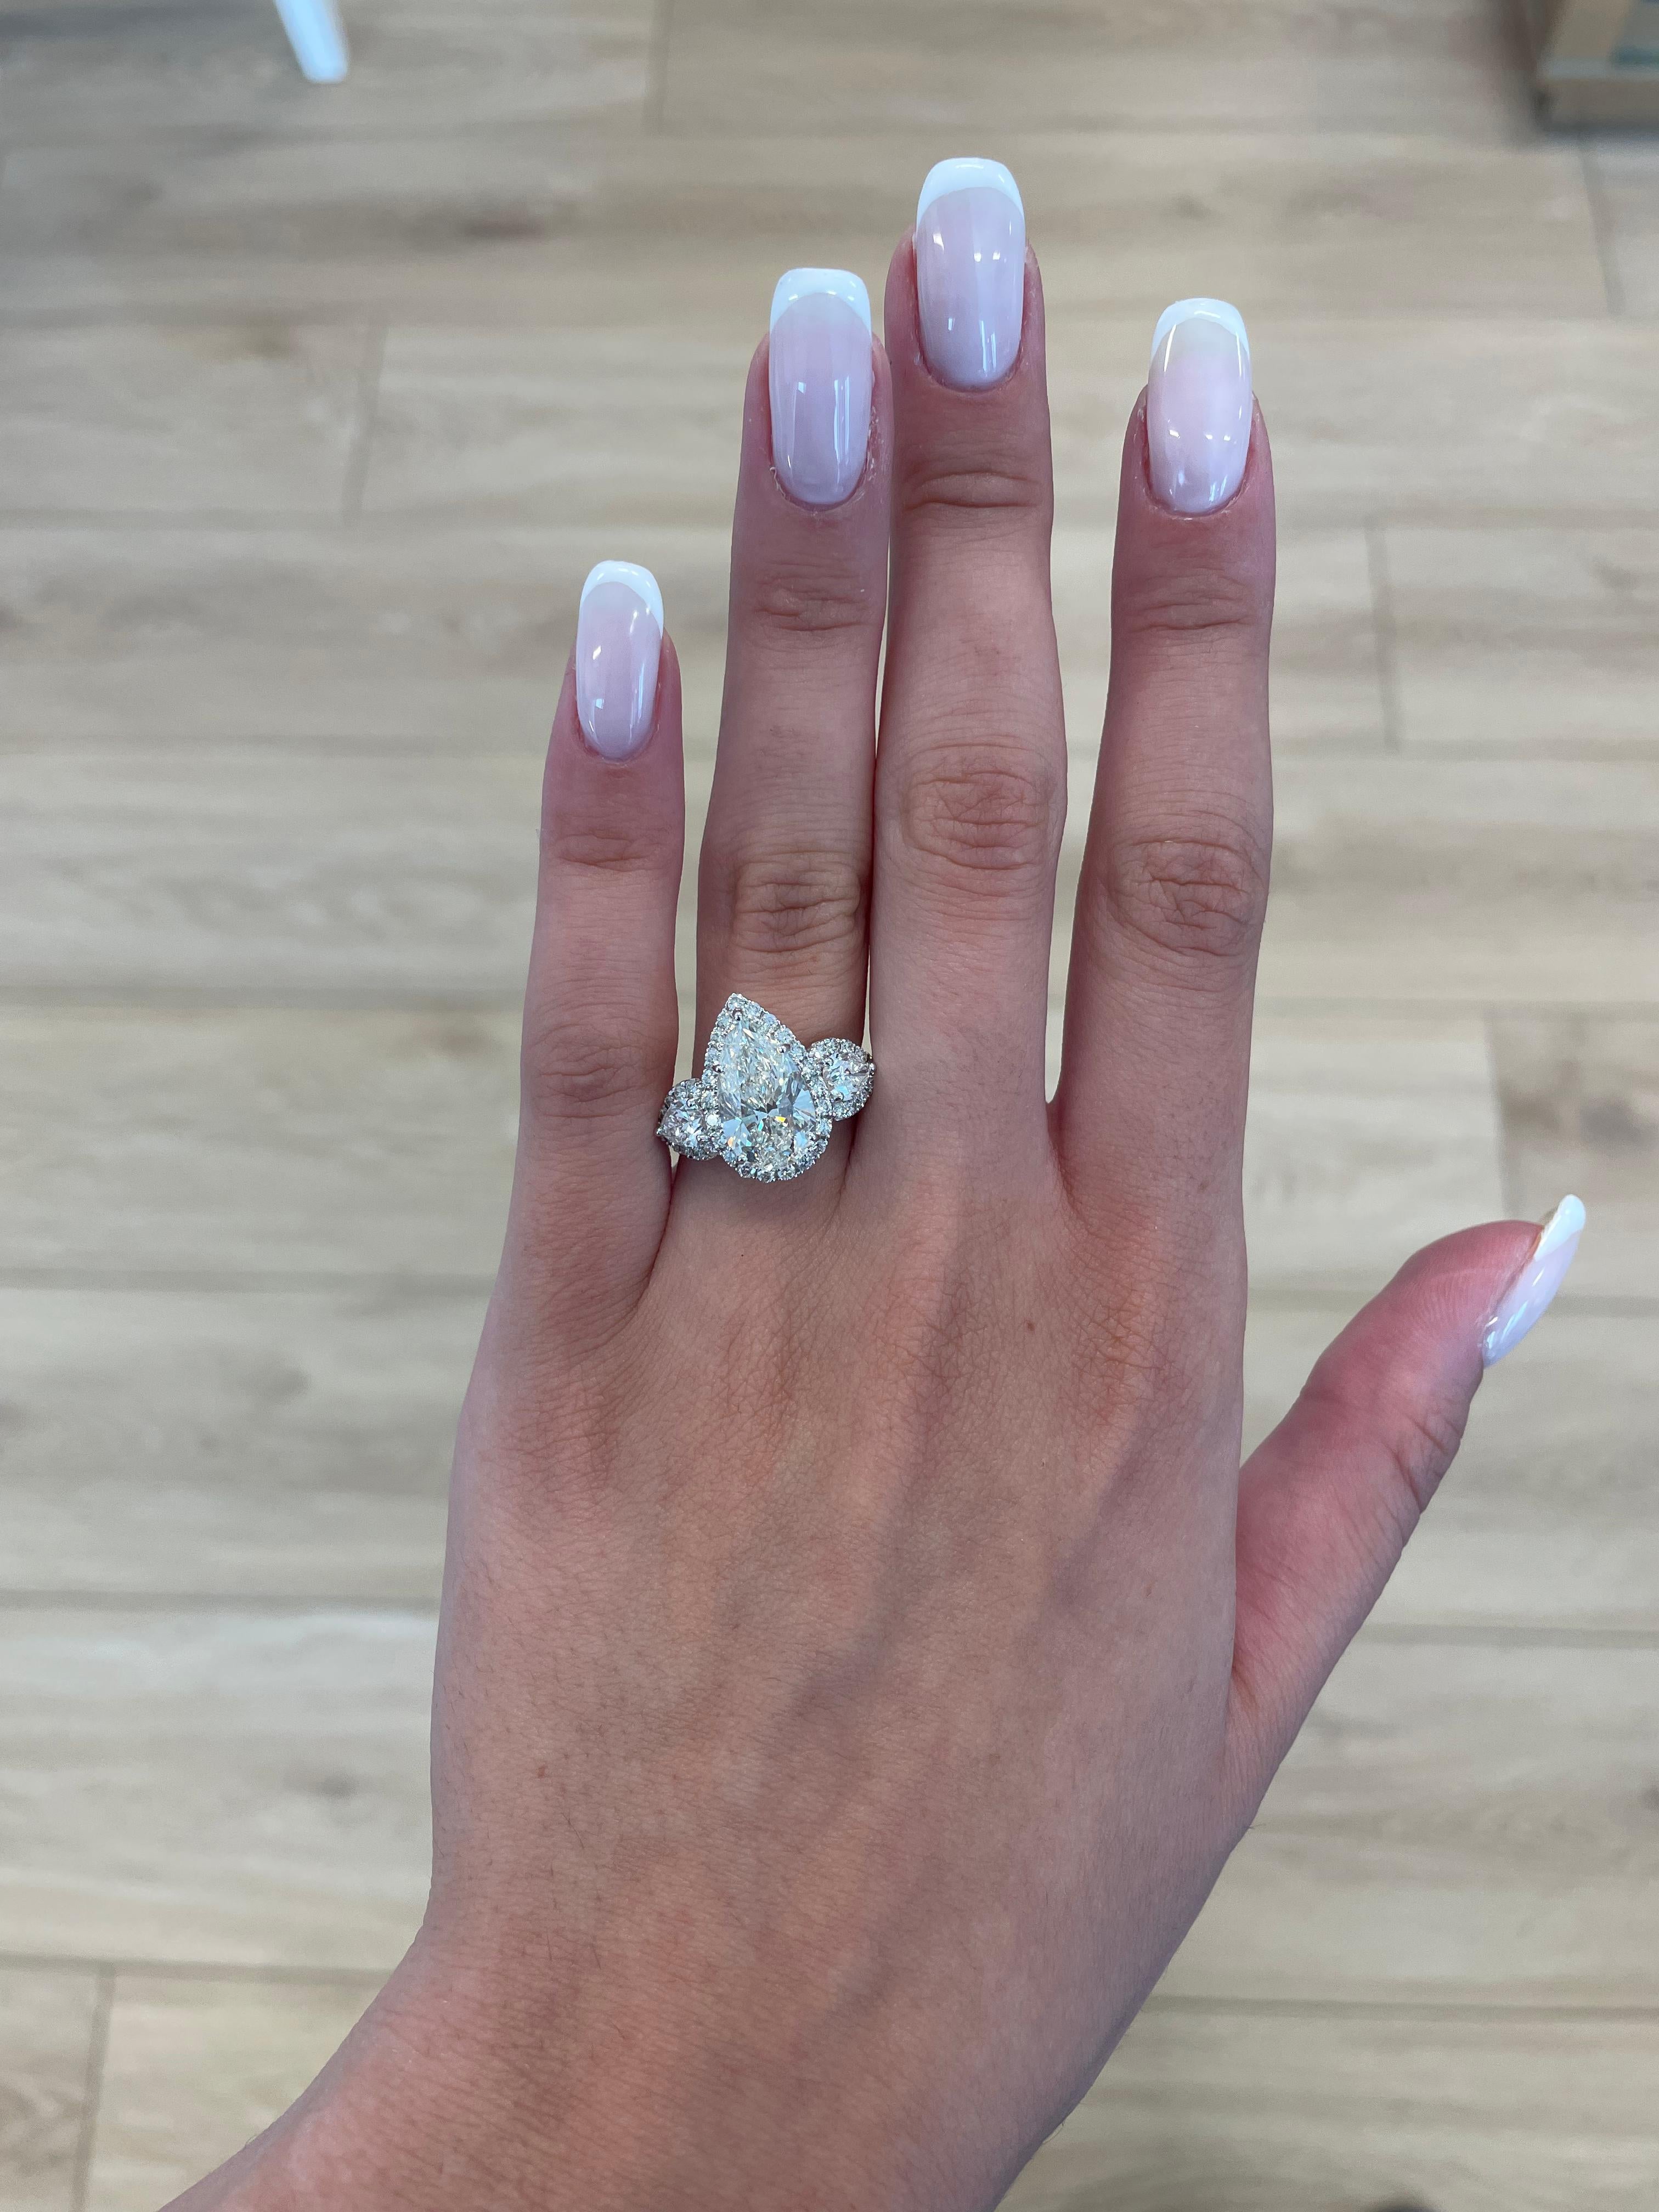 Stunning diamond three-stone engagement ring with halo, GIA certified. High jewelry by Alexander Beverly Hills.
5.85 carats total diamond weight.
4 carat pear shape diamond, GIA certified. J color grade and VS2 clarity. Complimented by 2 pear shape